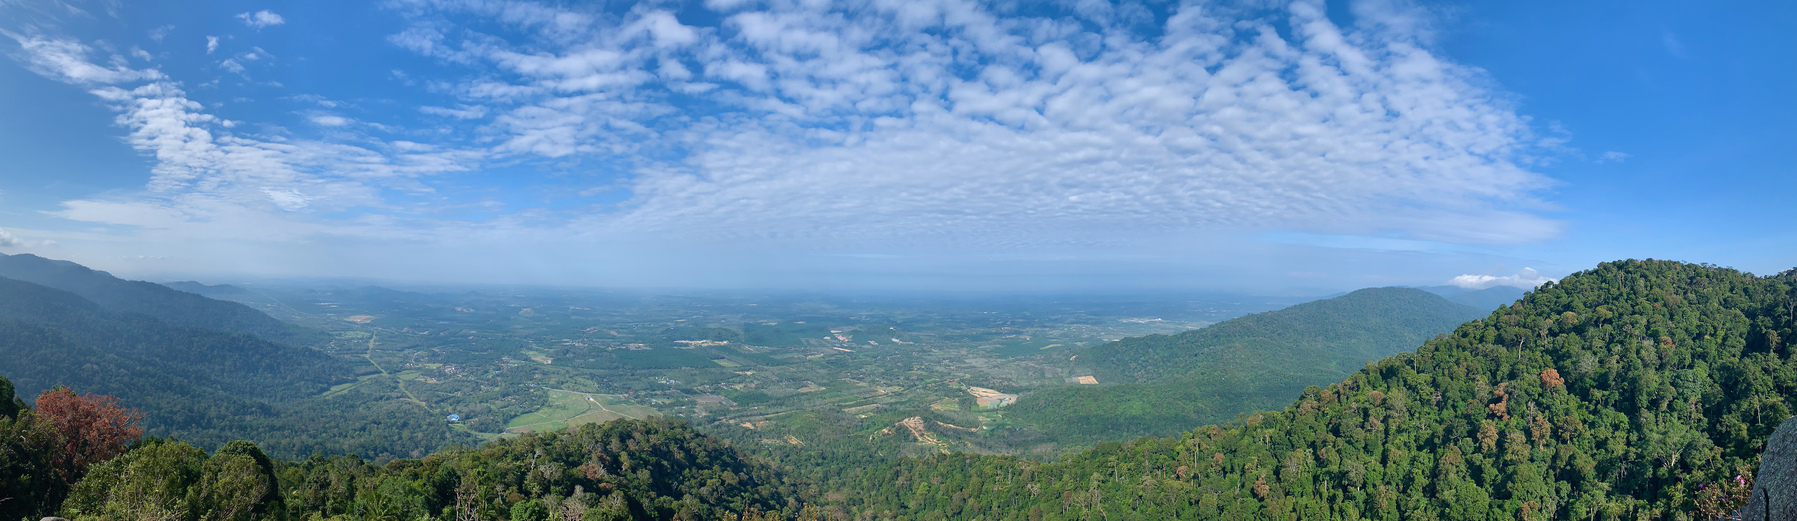 A panorama shot of the view from the summit